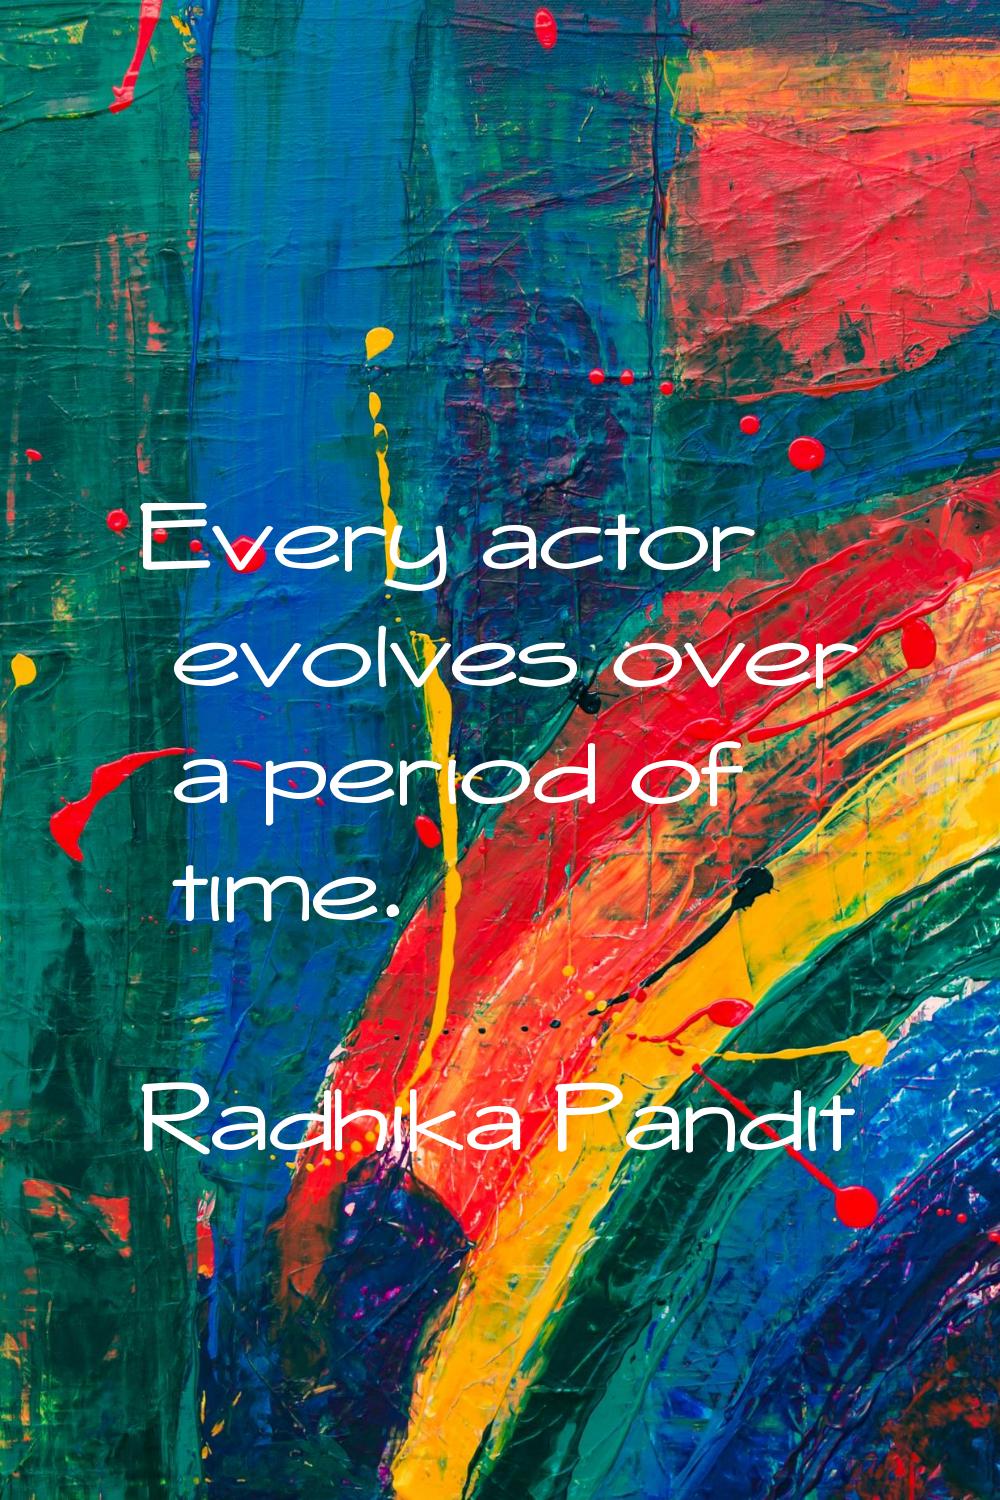 Every actor evolves over a period of time.